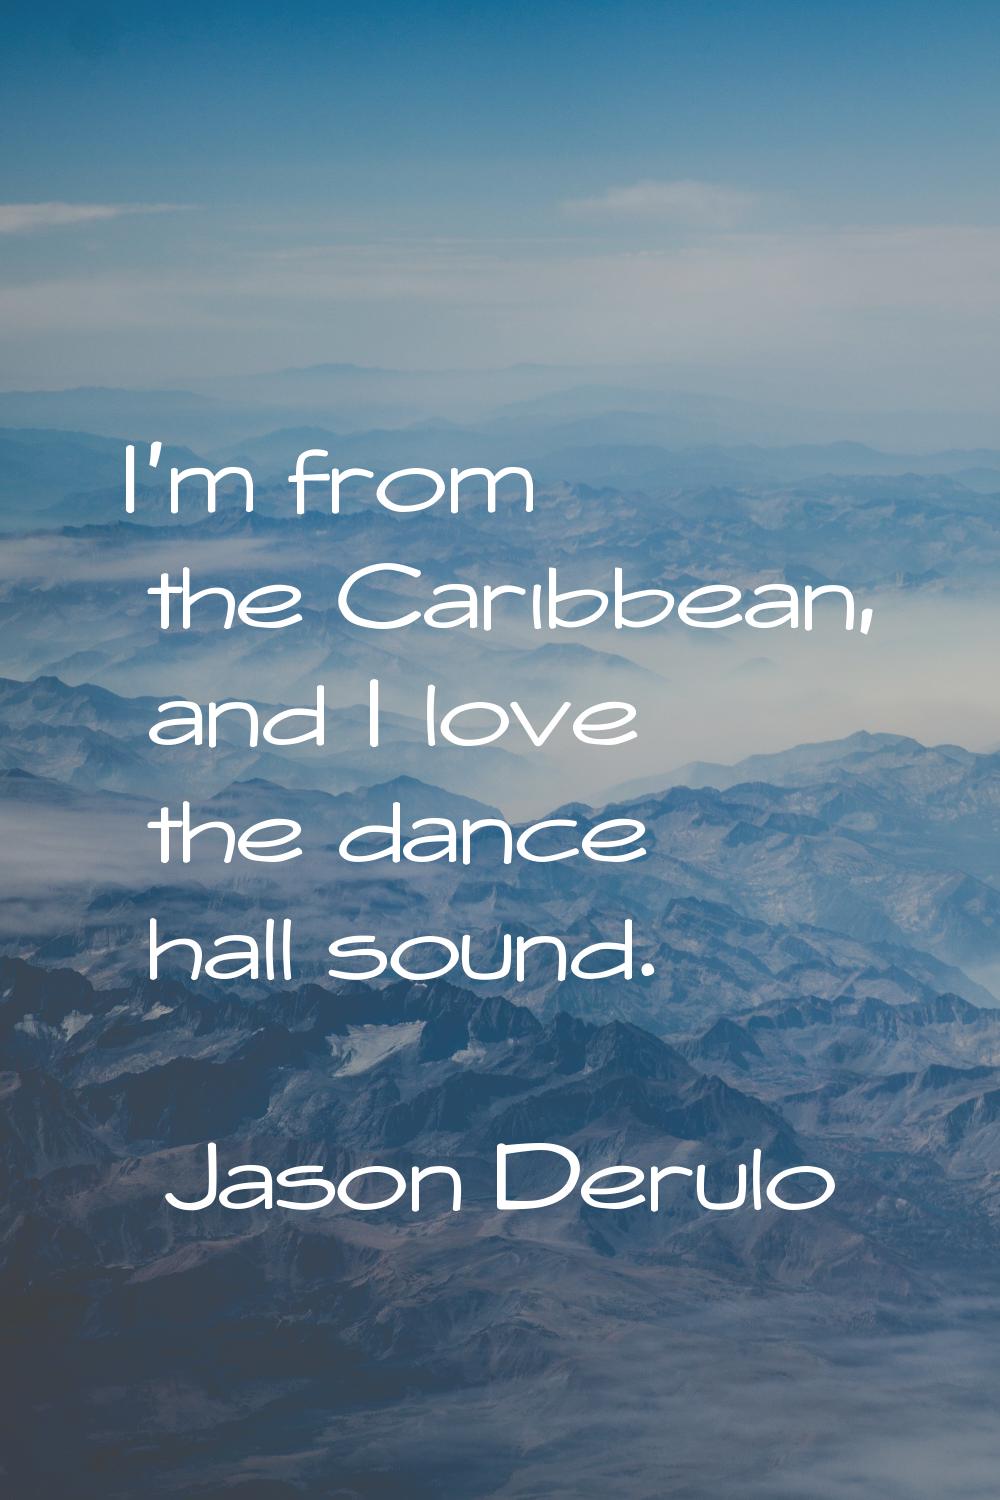 I'm from the Caribbean, and I love the dance hall sound.